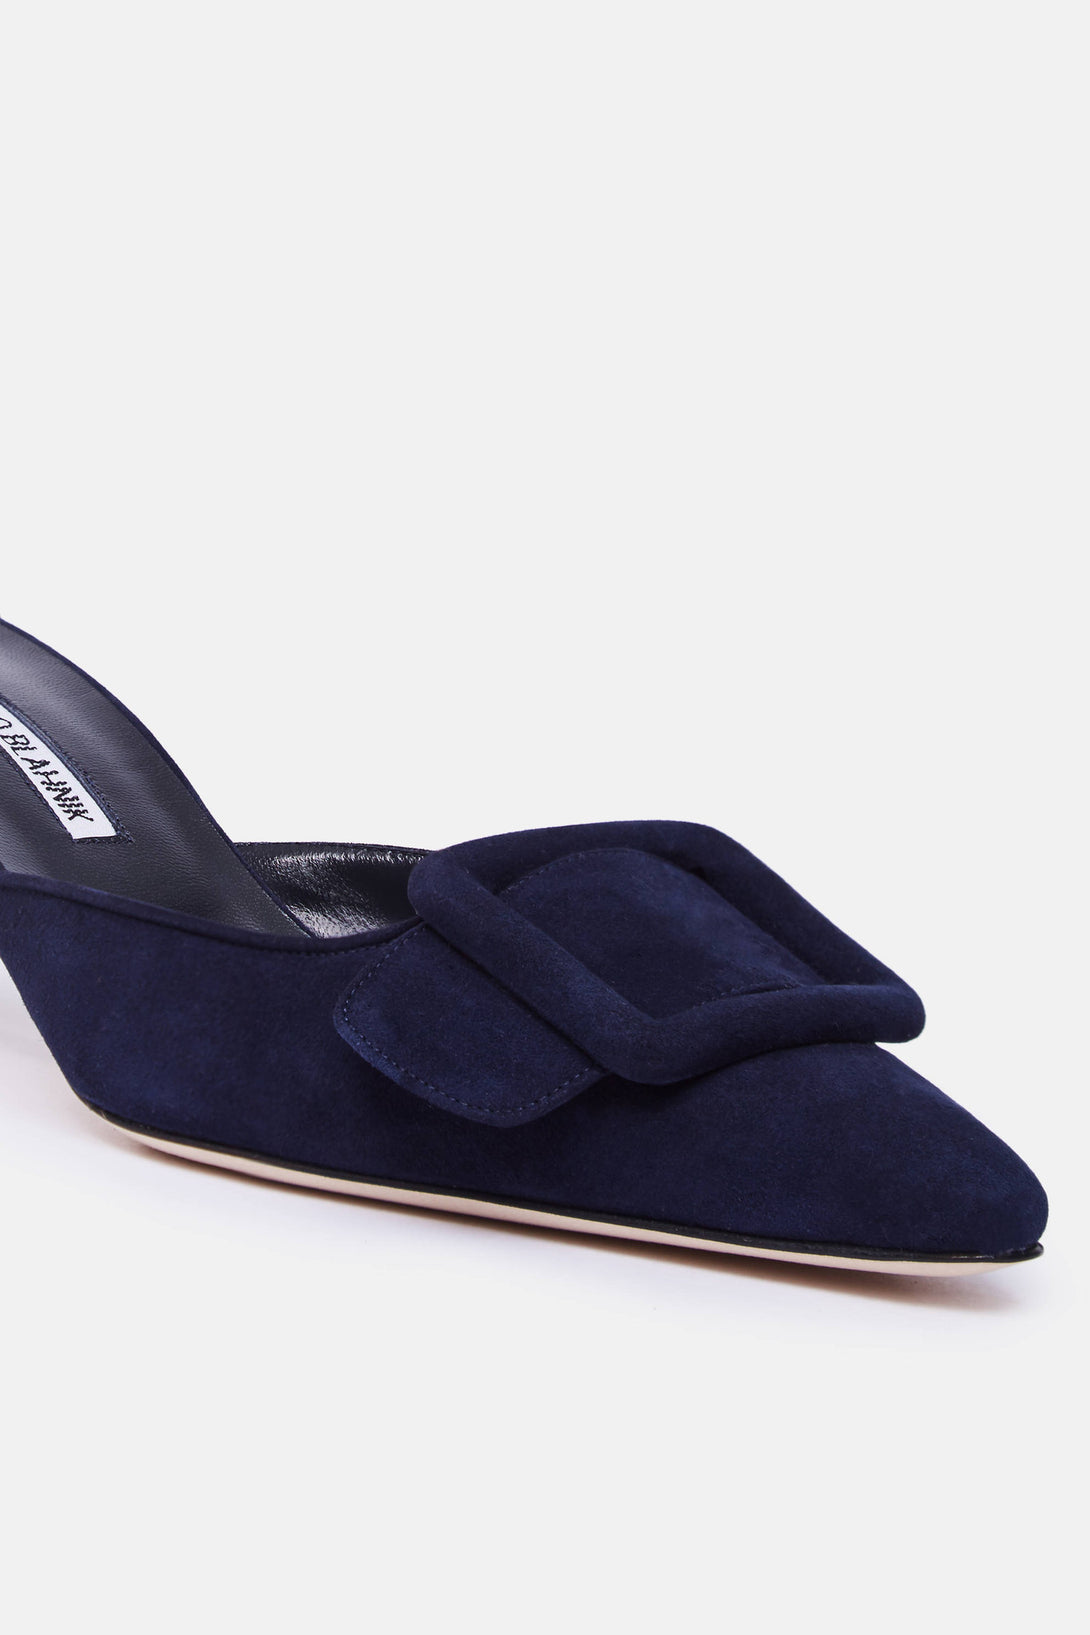 navy blue suede mules